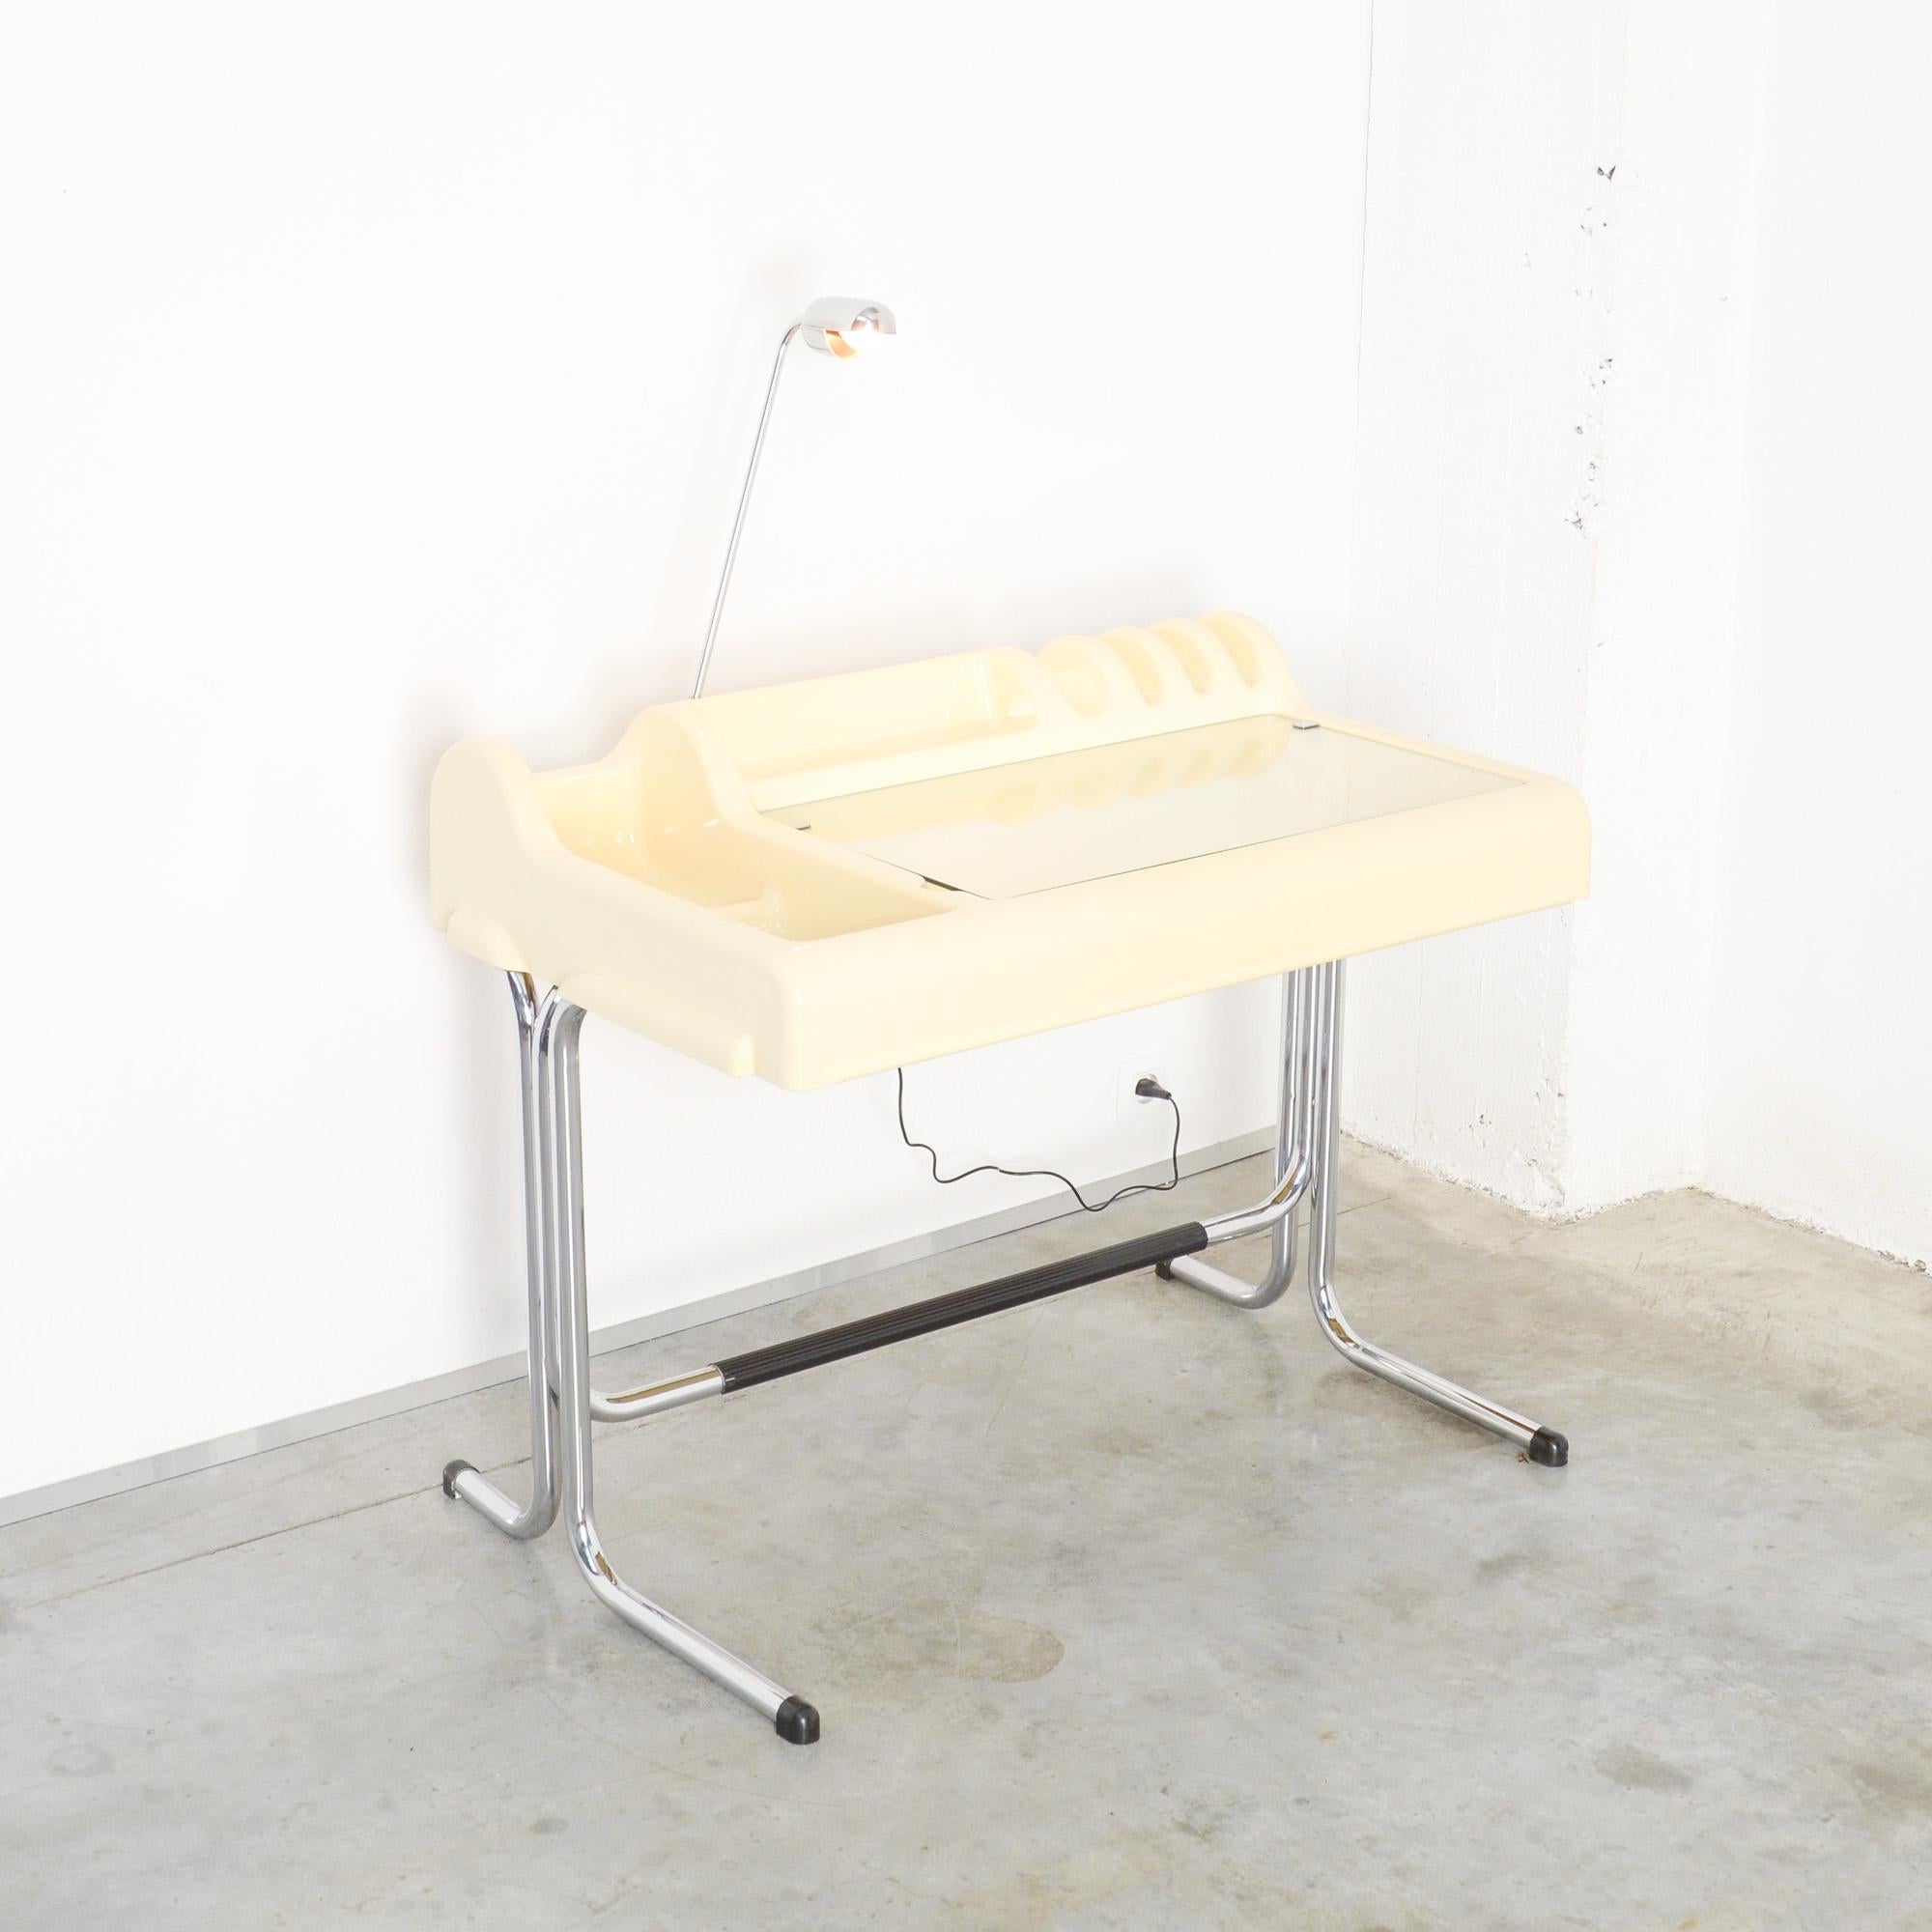 This space age desk was designed by Vittorio Parigi & Nani Prina for Molteni, Italy.
It is made of white plastic, a little yellowed due to age and use. The top is made of glass and can be opened. The chromed metal base is finished with black